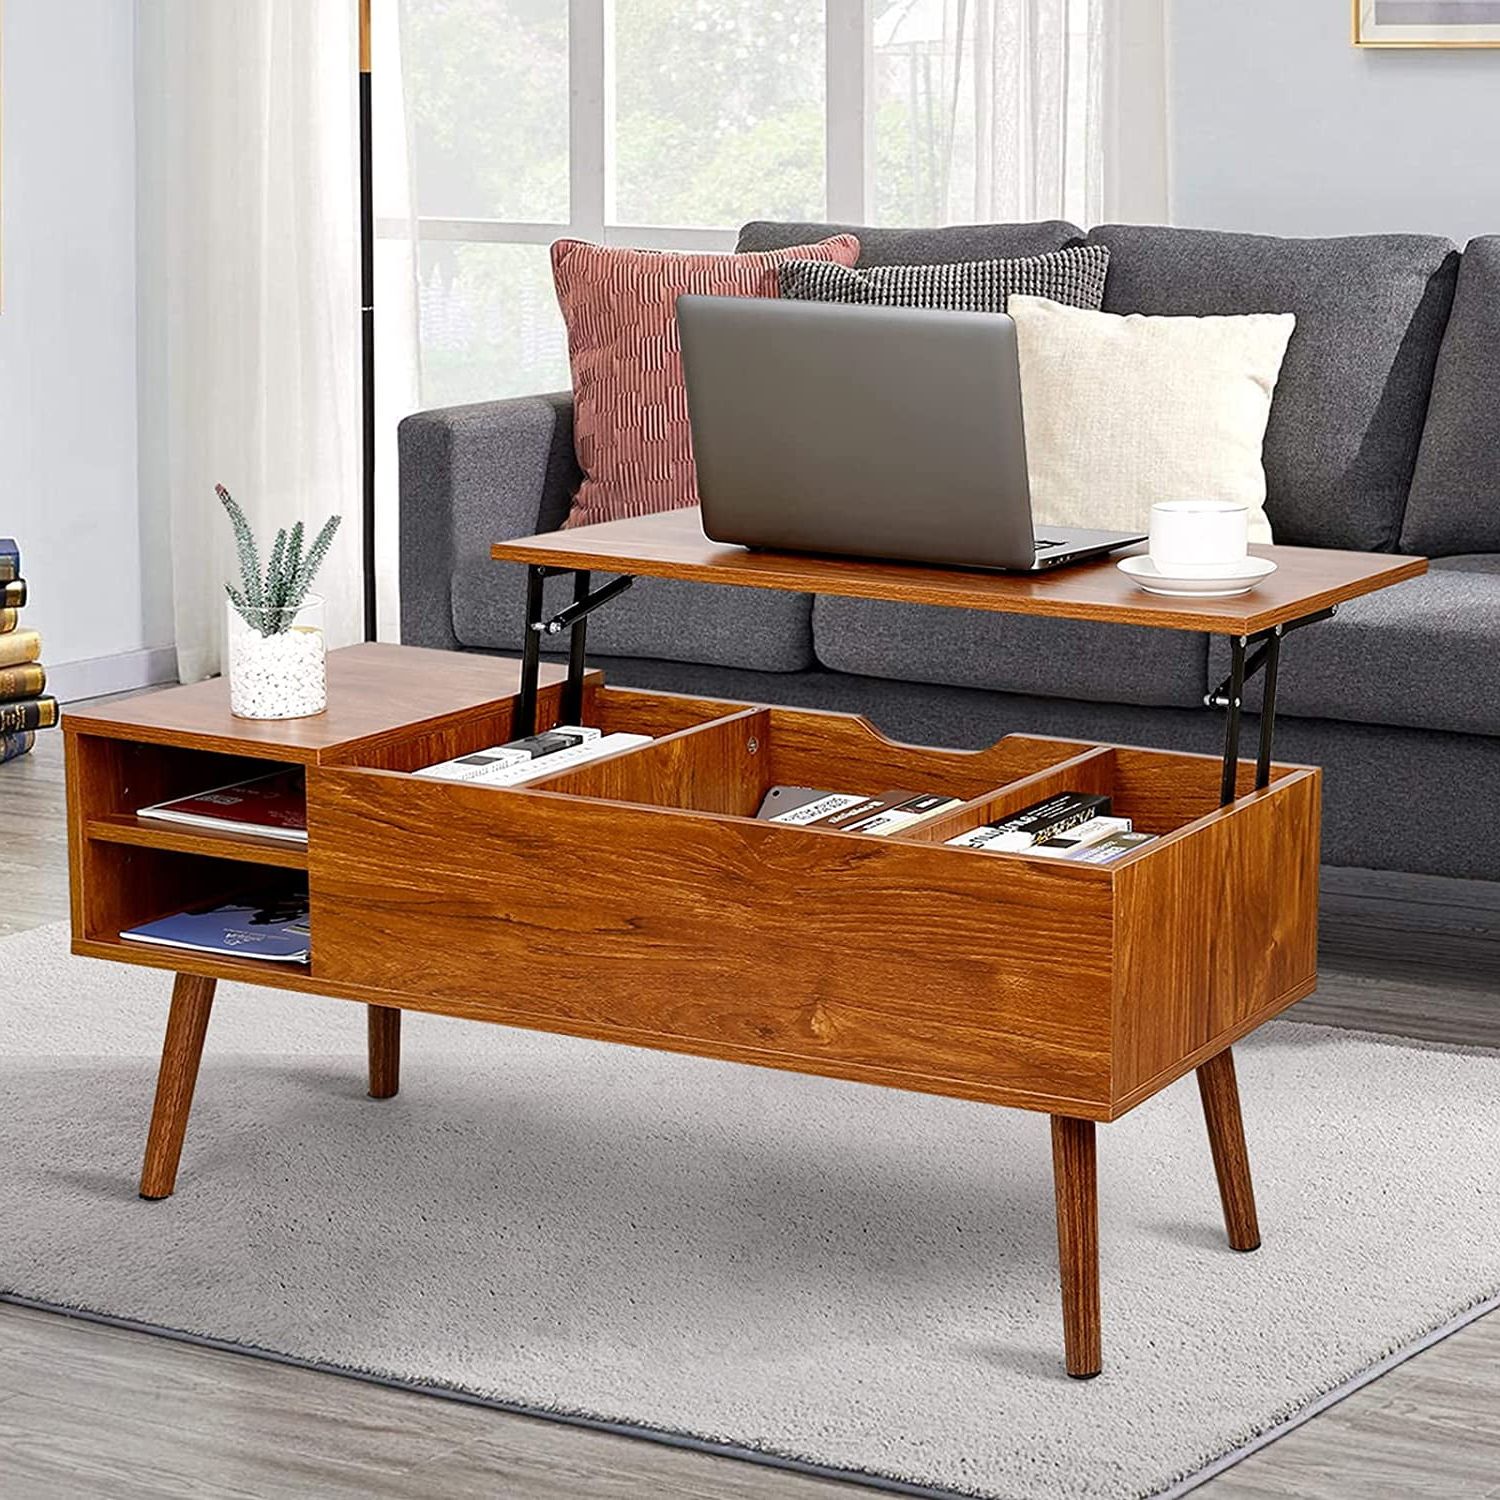 Newest Modern Lift Top Coffee Table With Hidden Compartment Storage,adjustable Throughout Modern Wooden Lift Top Tables (View 2 of 15)